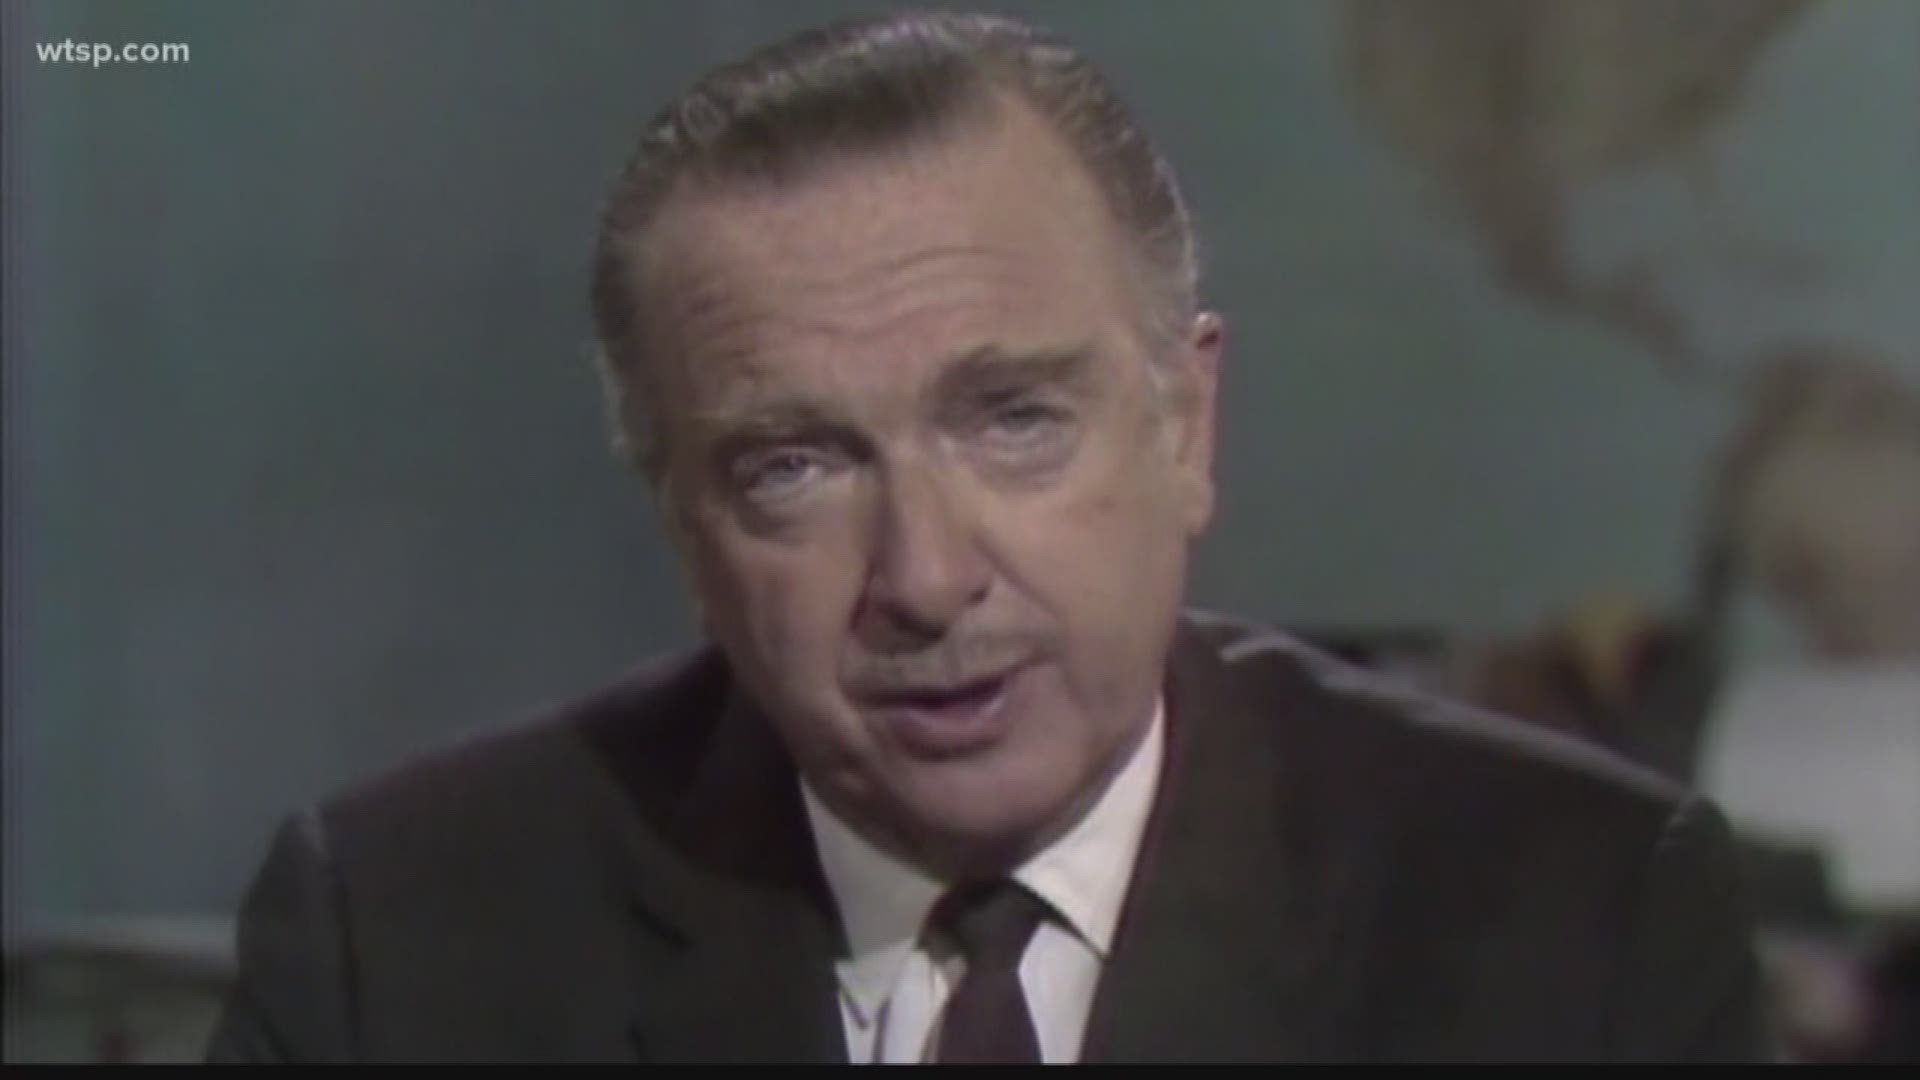 Some say President Lyndon B. Johnson claimed, "If I've lost Cronkite, I've lost middle America."